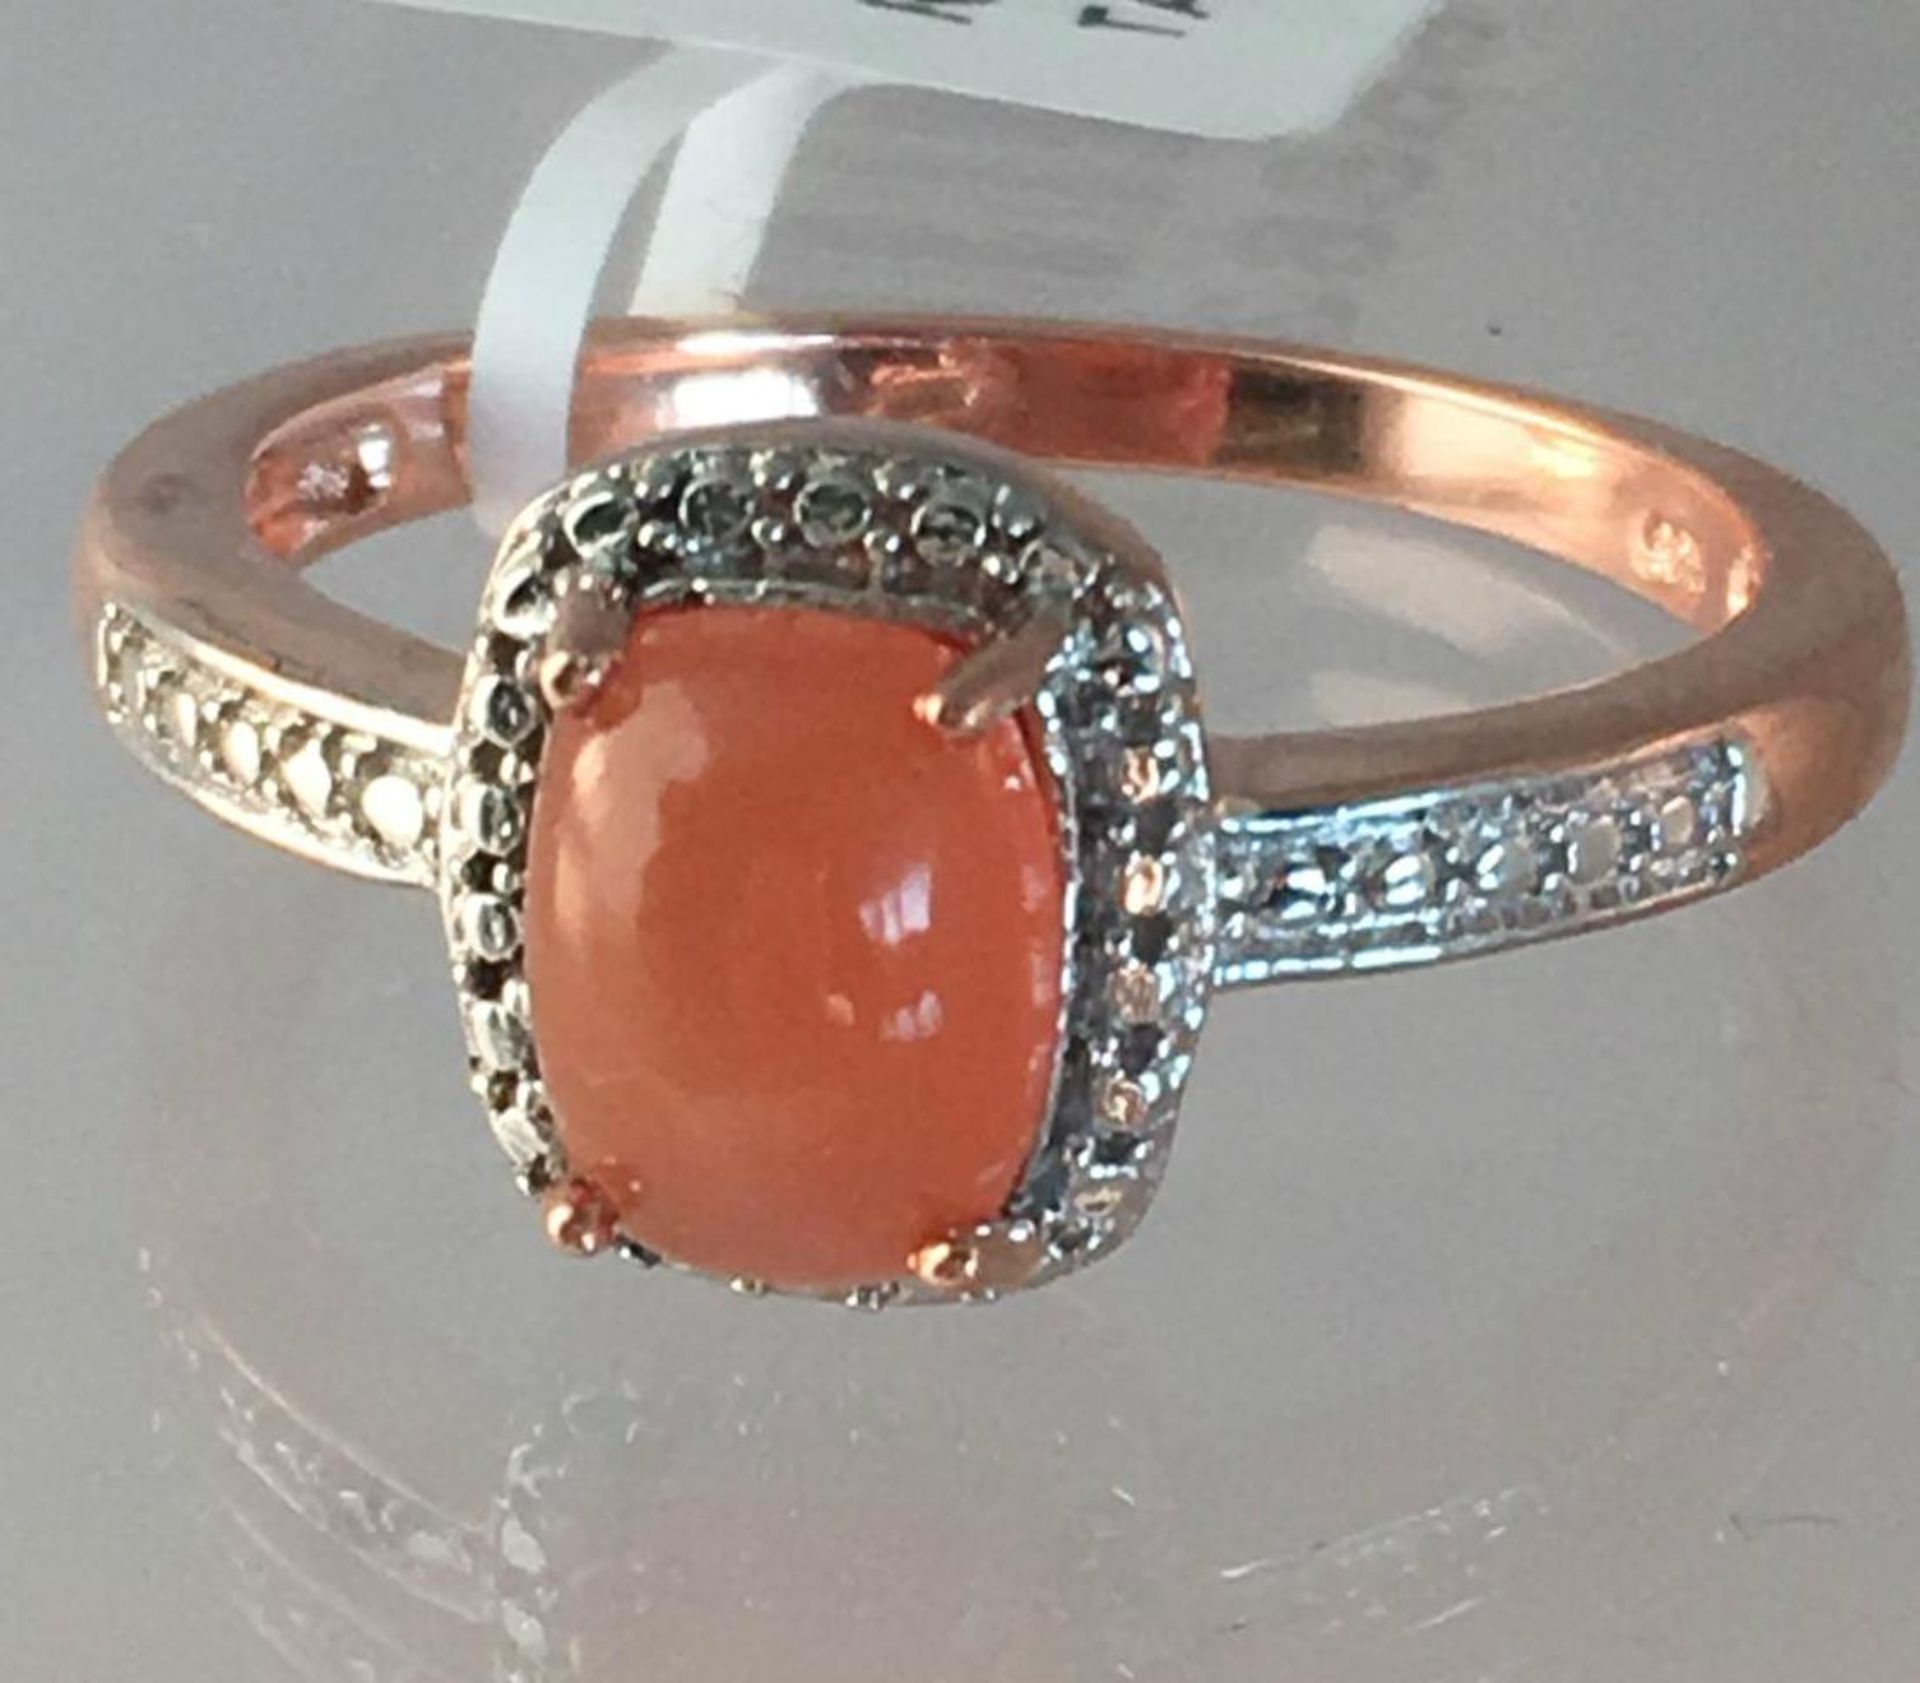 Peach Moonstone Solitaire Ring Rose Gold Over 925 Silver - Size R . Includes free UK delivery